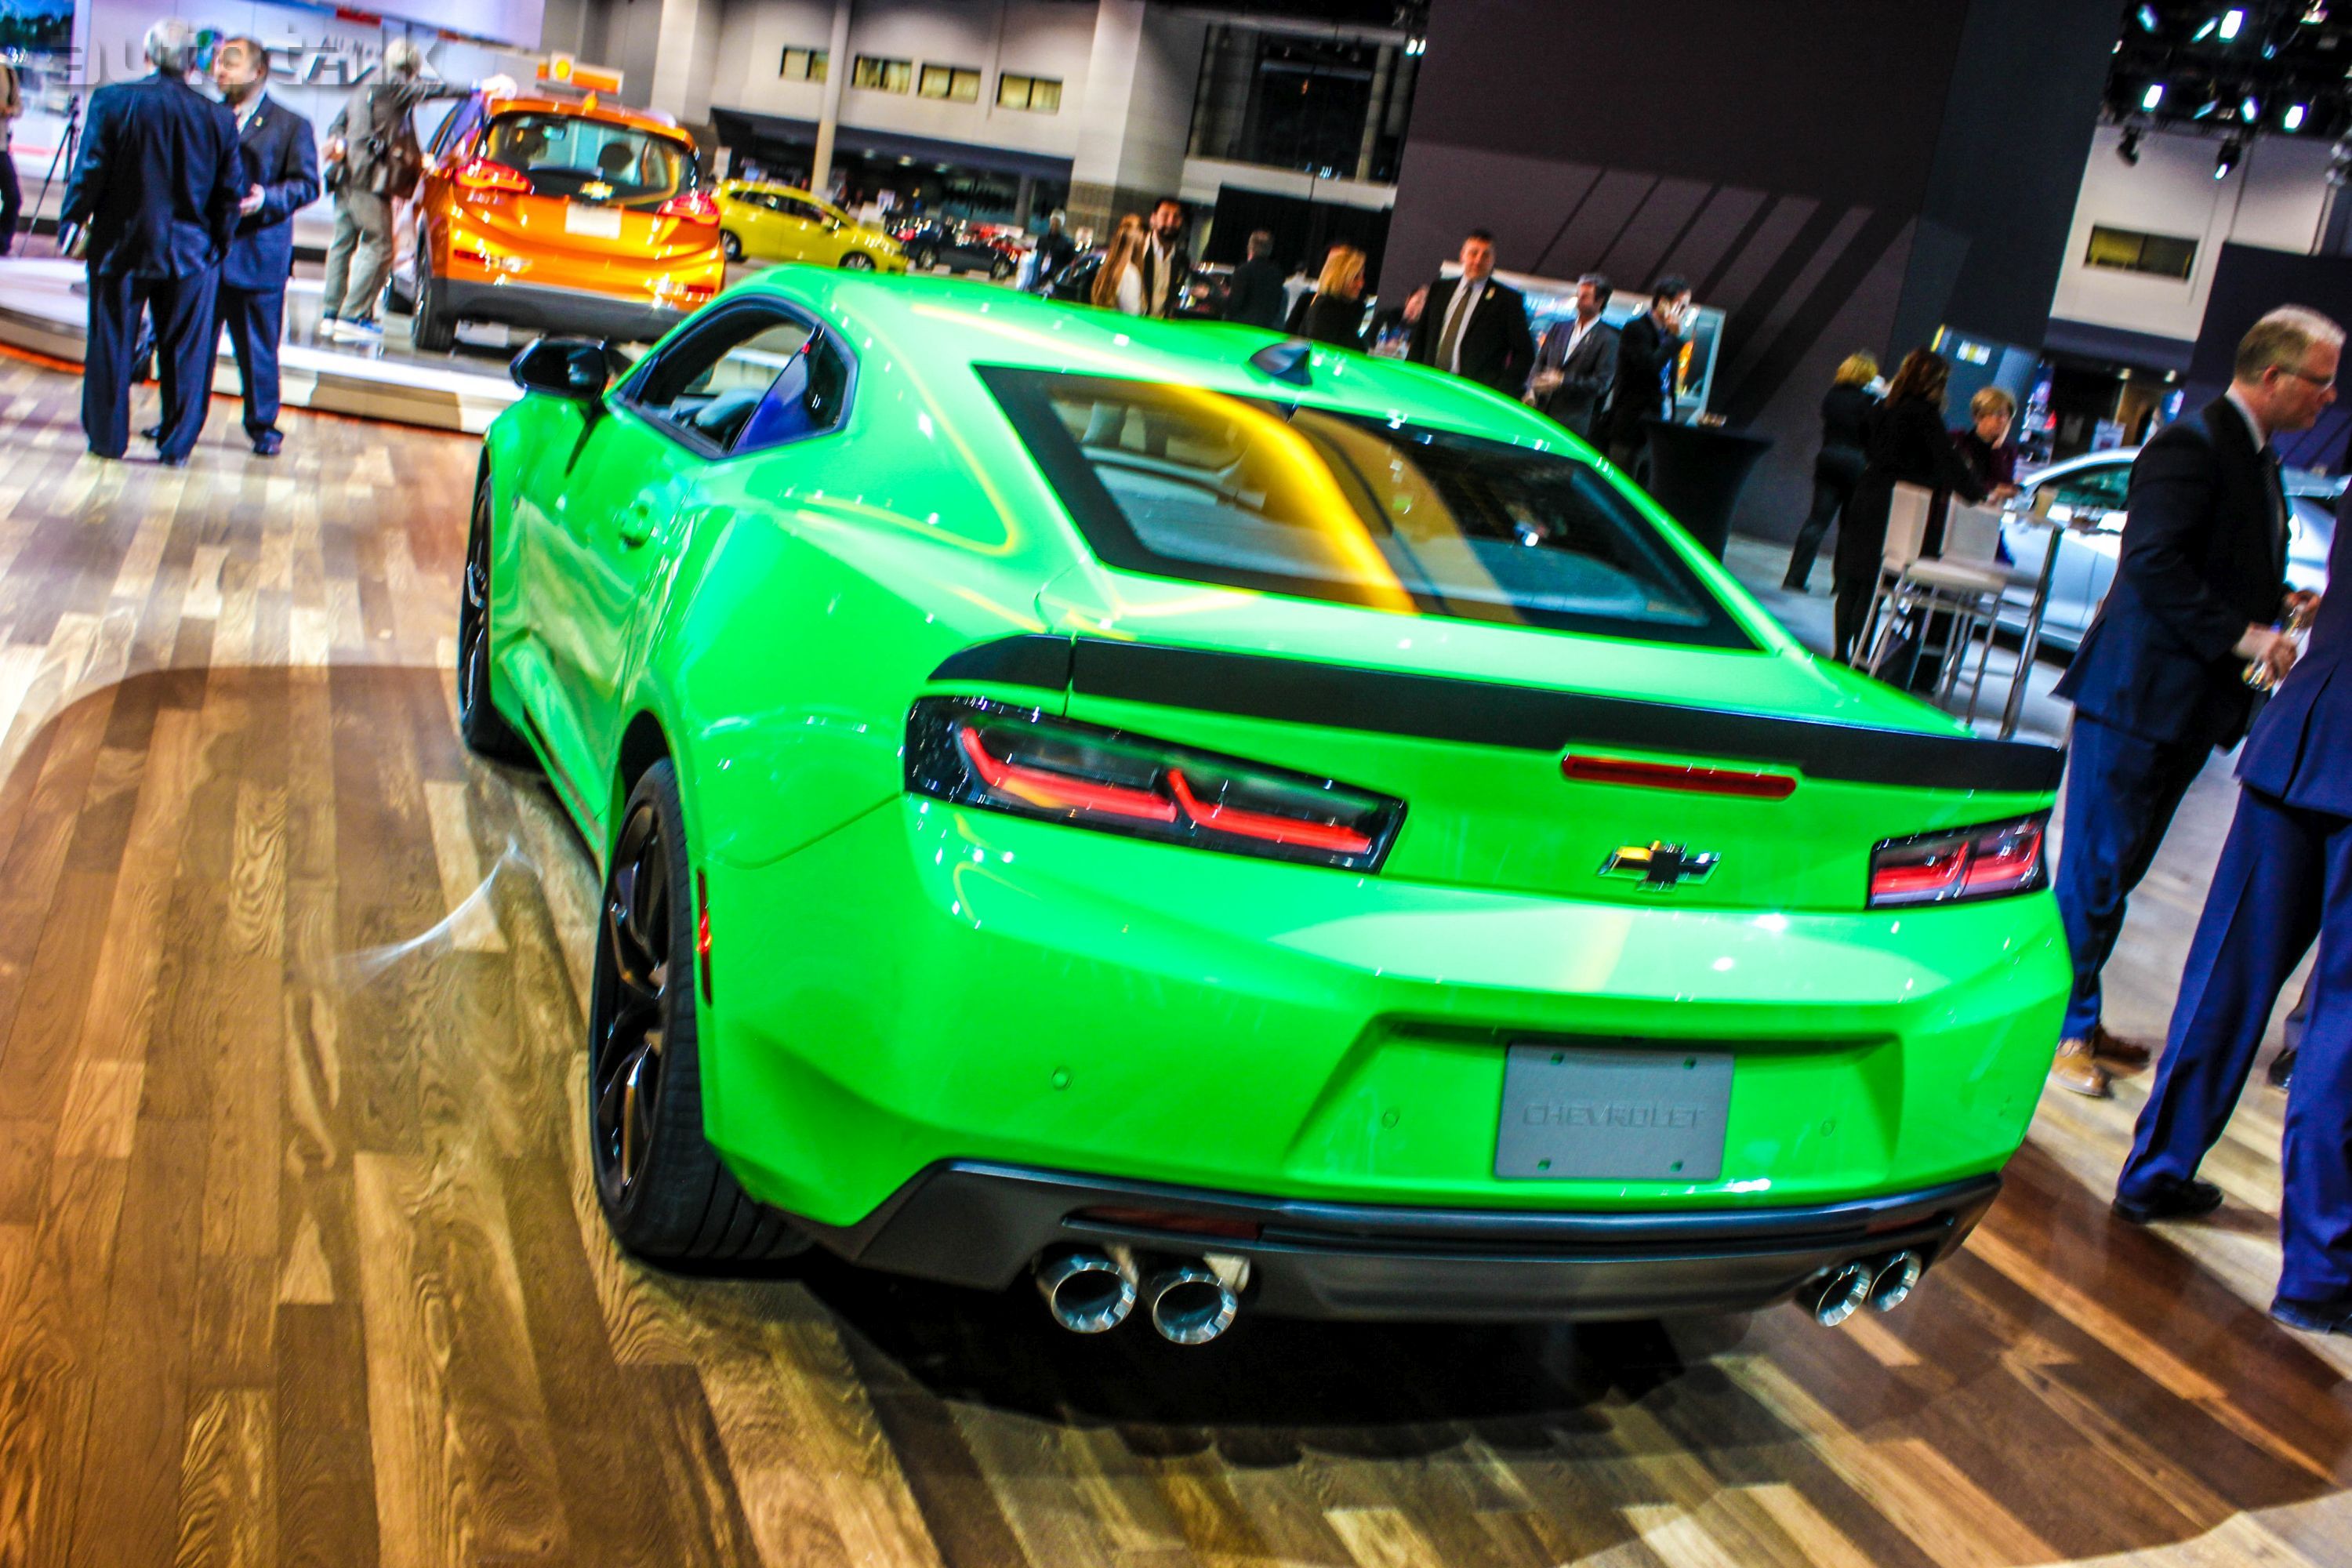 Chevy at 2016 Chicago Auto Show